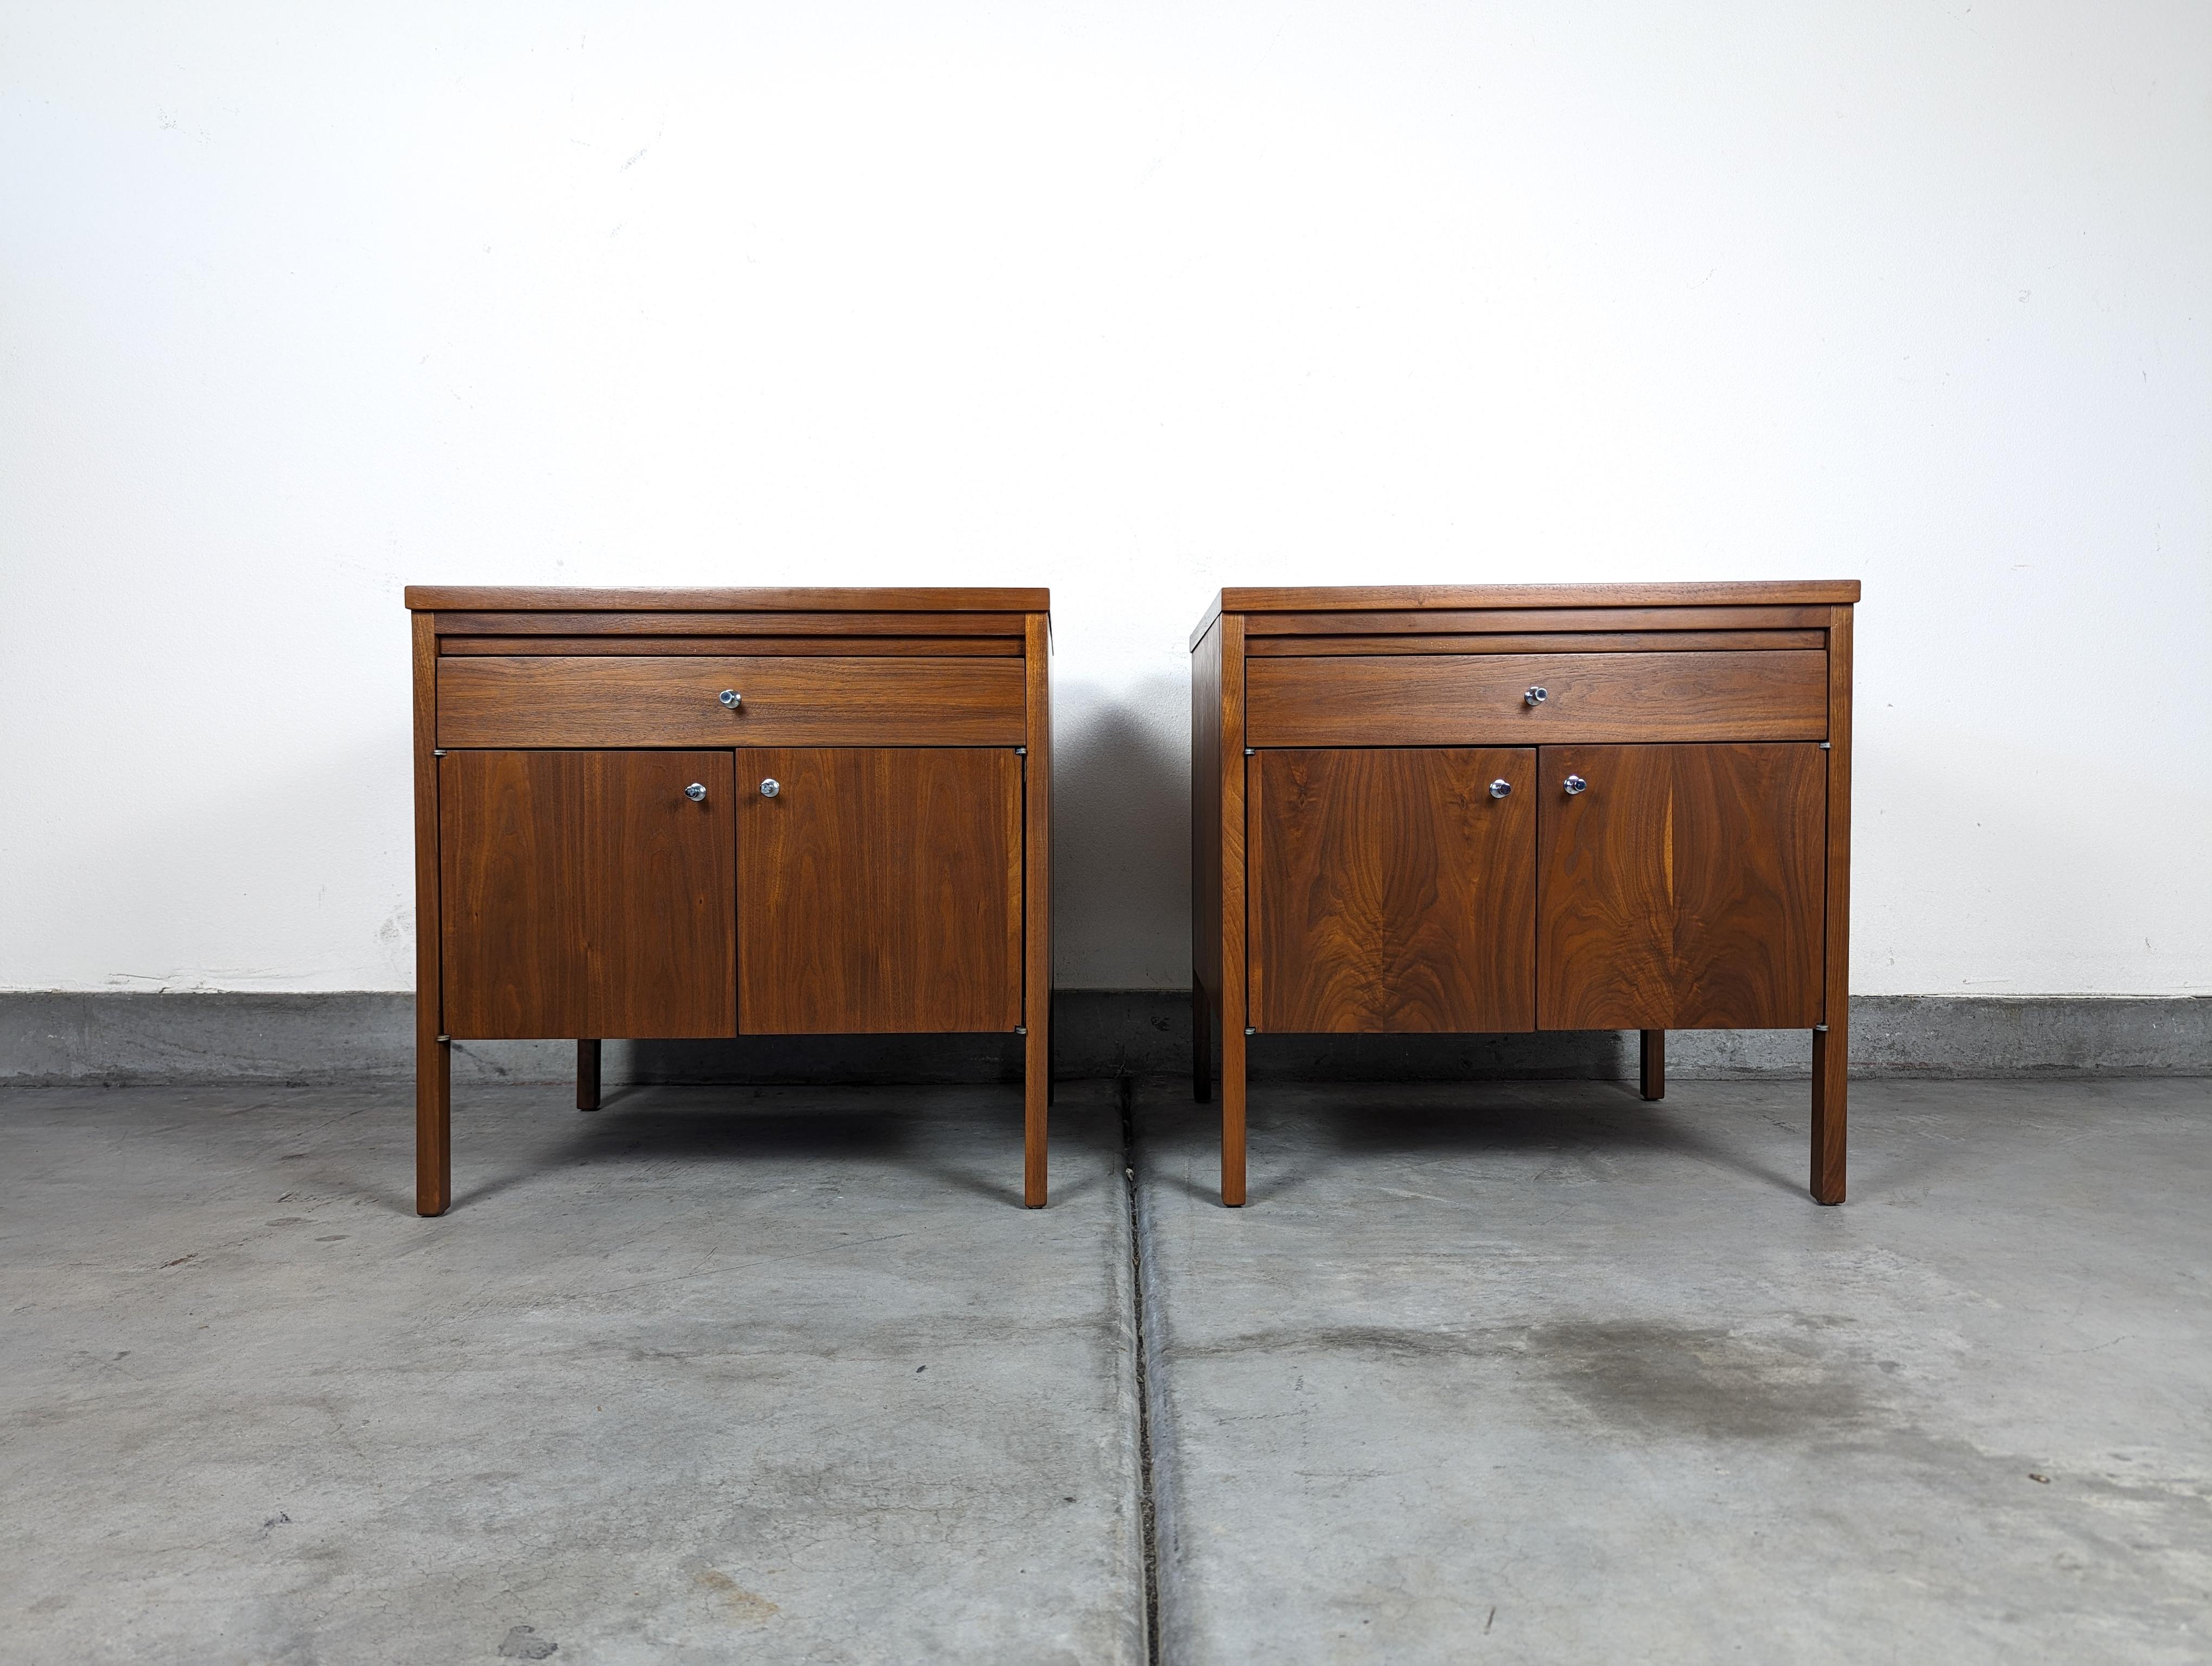 Delve into the world of mid-century elegance with this rare pair of vintage nightstands, hailing from the illustrious 'Delineator' series designed by the iconic Paul McCobb for Lane in the 1960s. These pieces showcase the unmatched craftsmanship,